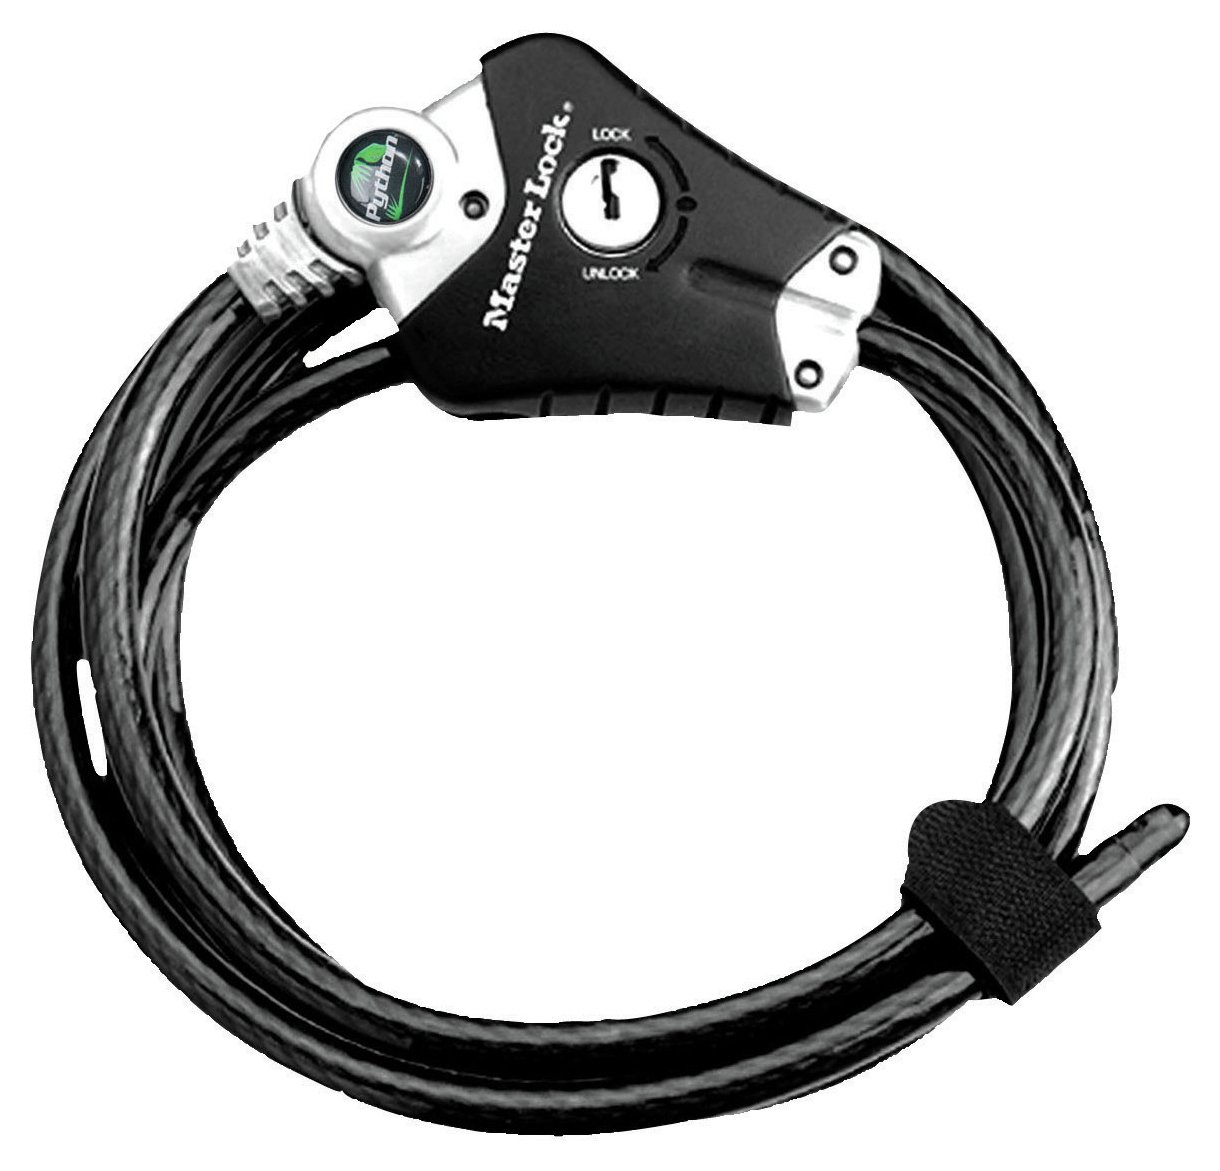 Master Lock Python Adjustable Cable Bike Lock review